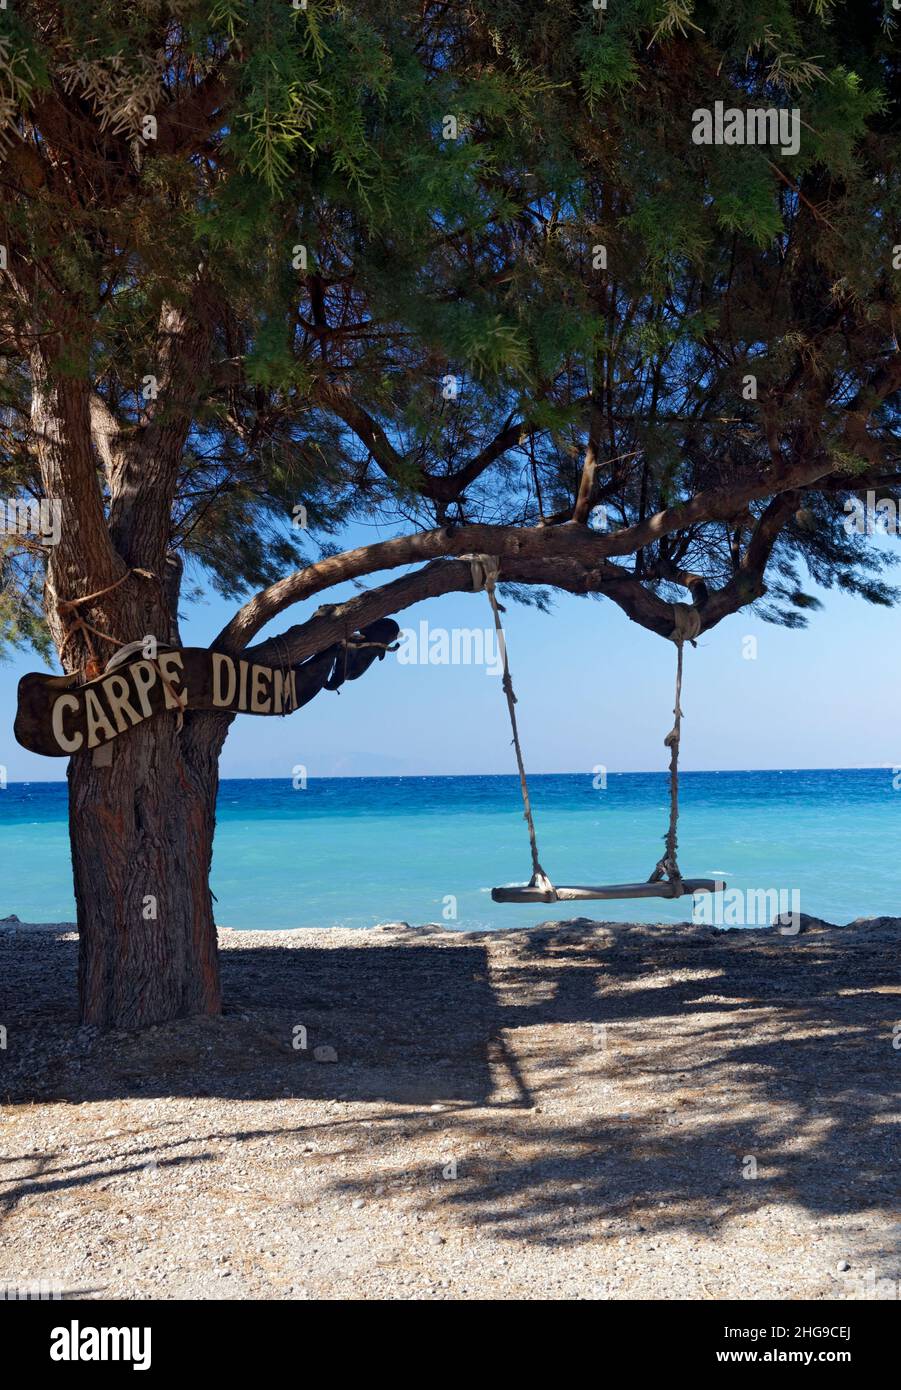 Swing and tree with Carpe Diem sign, Tilos, Dodecanese Islands, Greece. Stock Photo